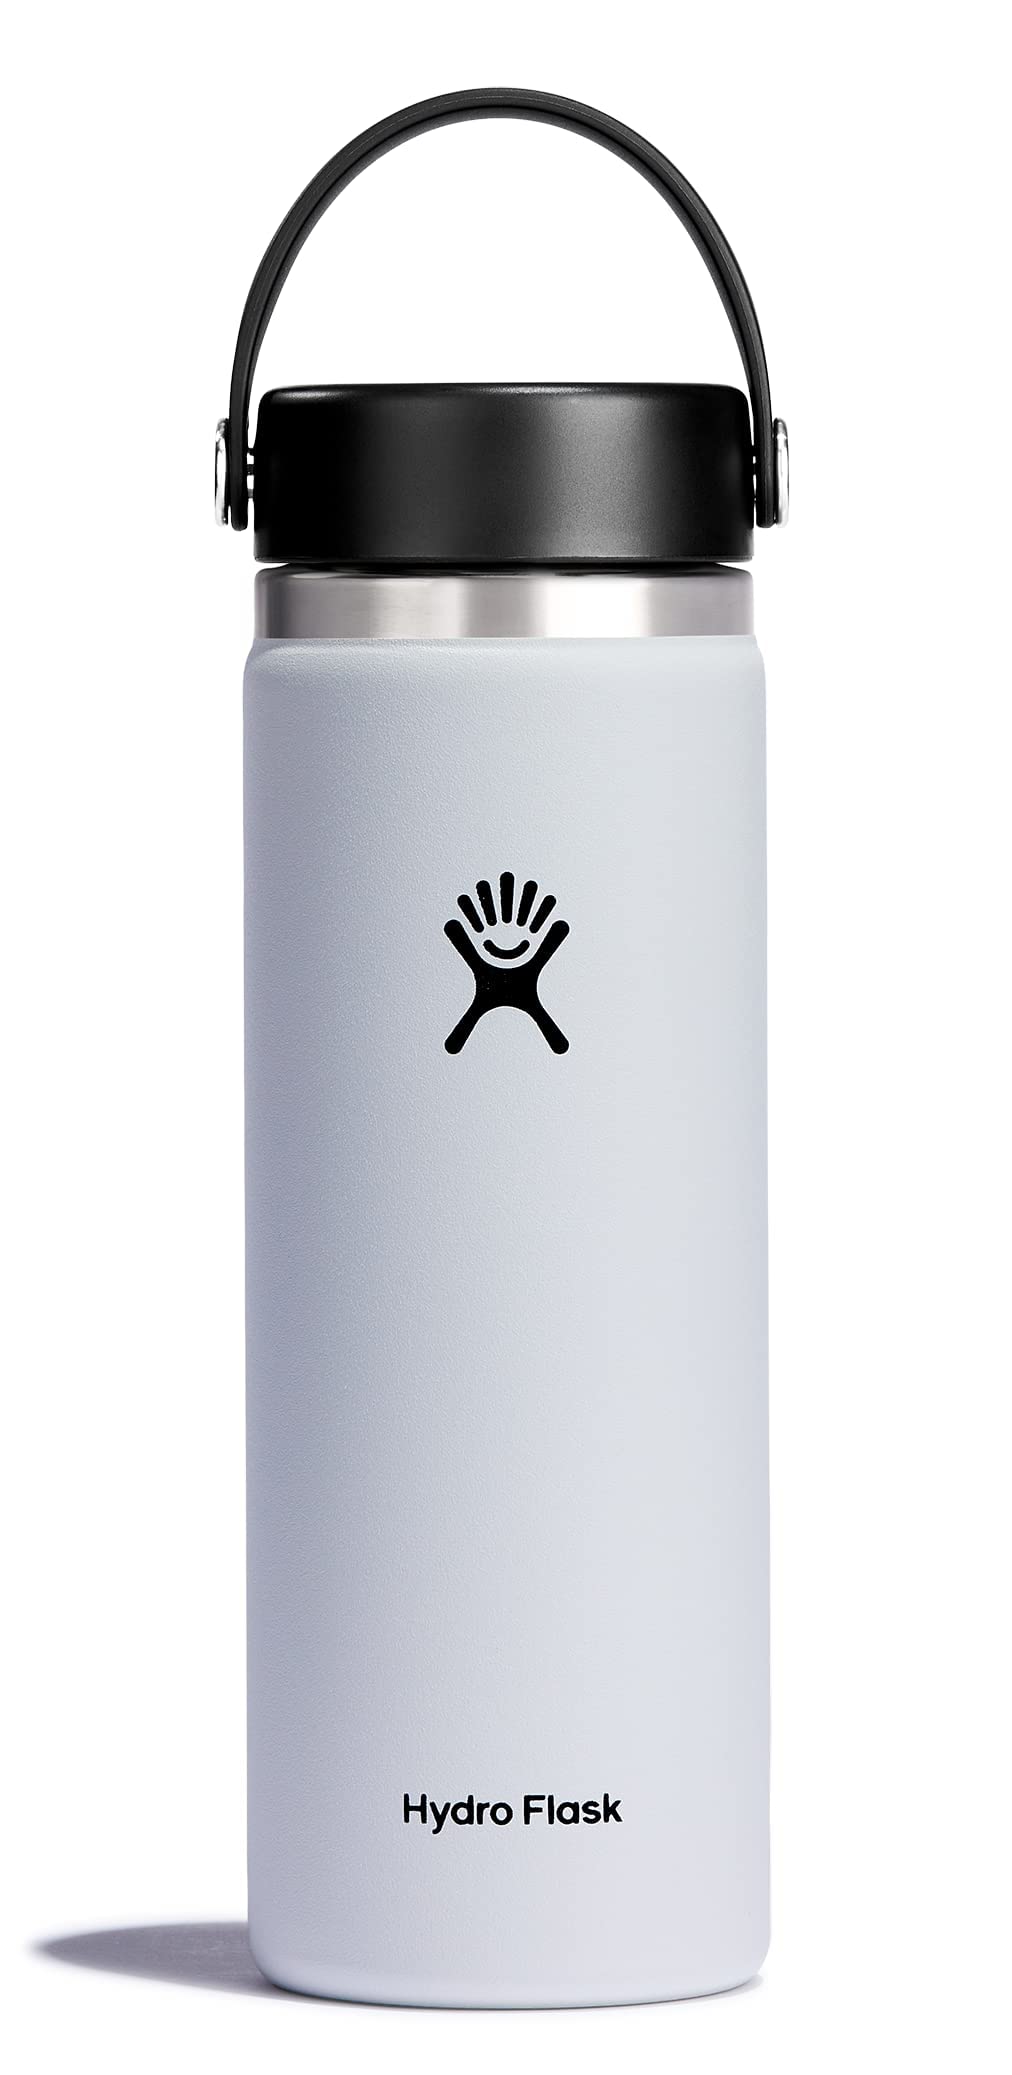 Hydro Flask Wide Mouth Bottle with Flex Cap White 20 oz $16.12 free shipping - Amazon